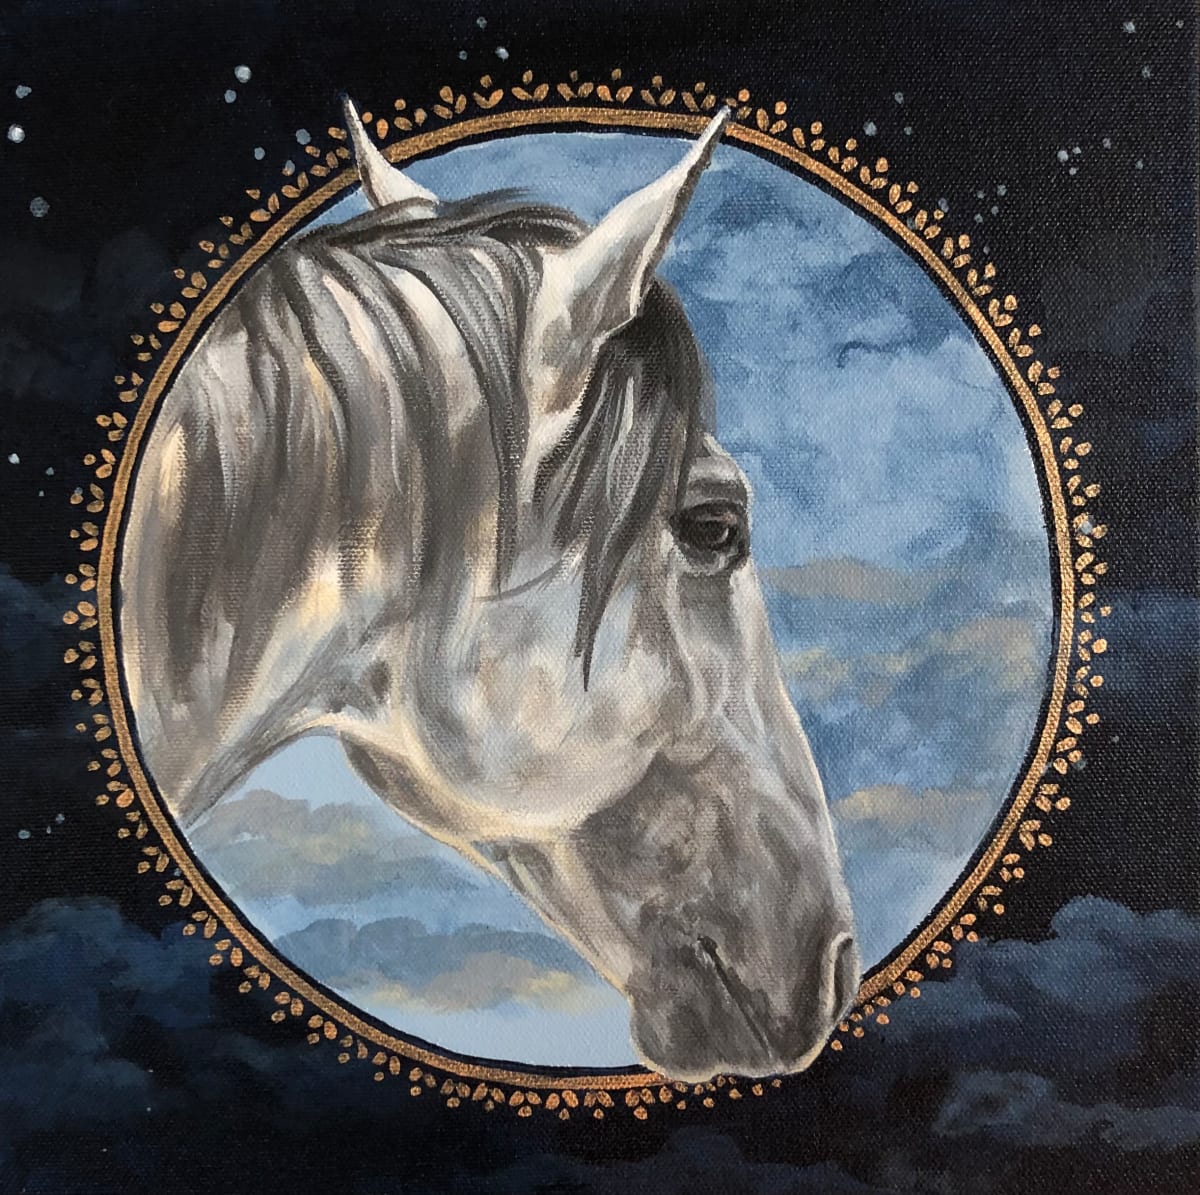 Celestial Gray #2 by Nicki Forde-Ficocelli  Image: Celestial Gray #2: 12x12 acrylic on gallery wrapped canvas